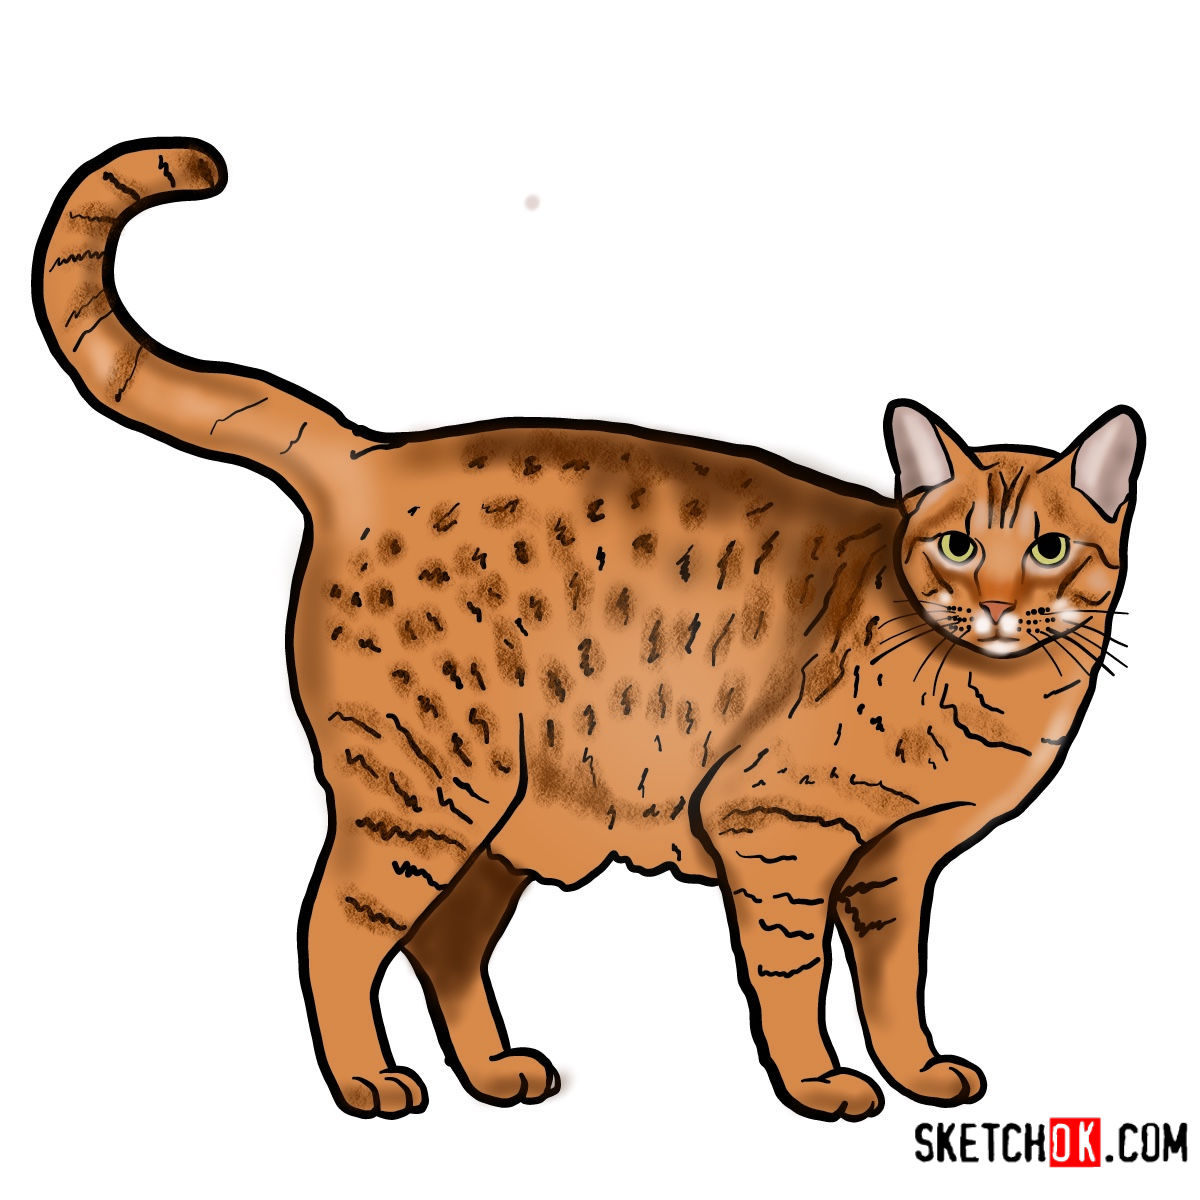 How to draw The Ocicat